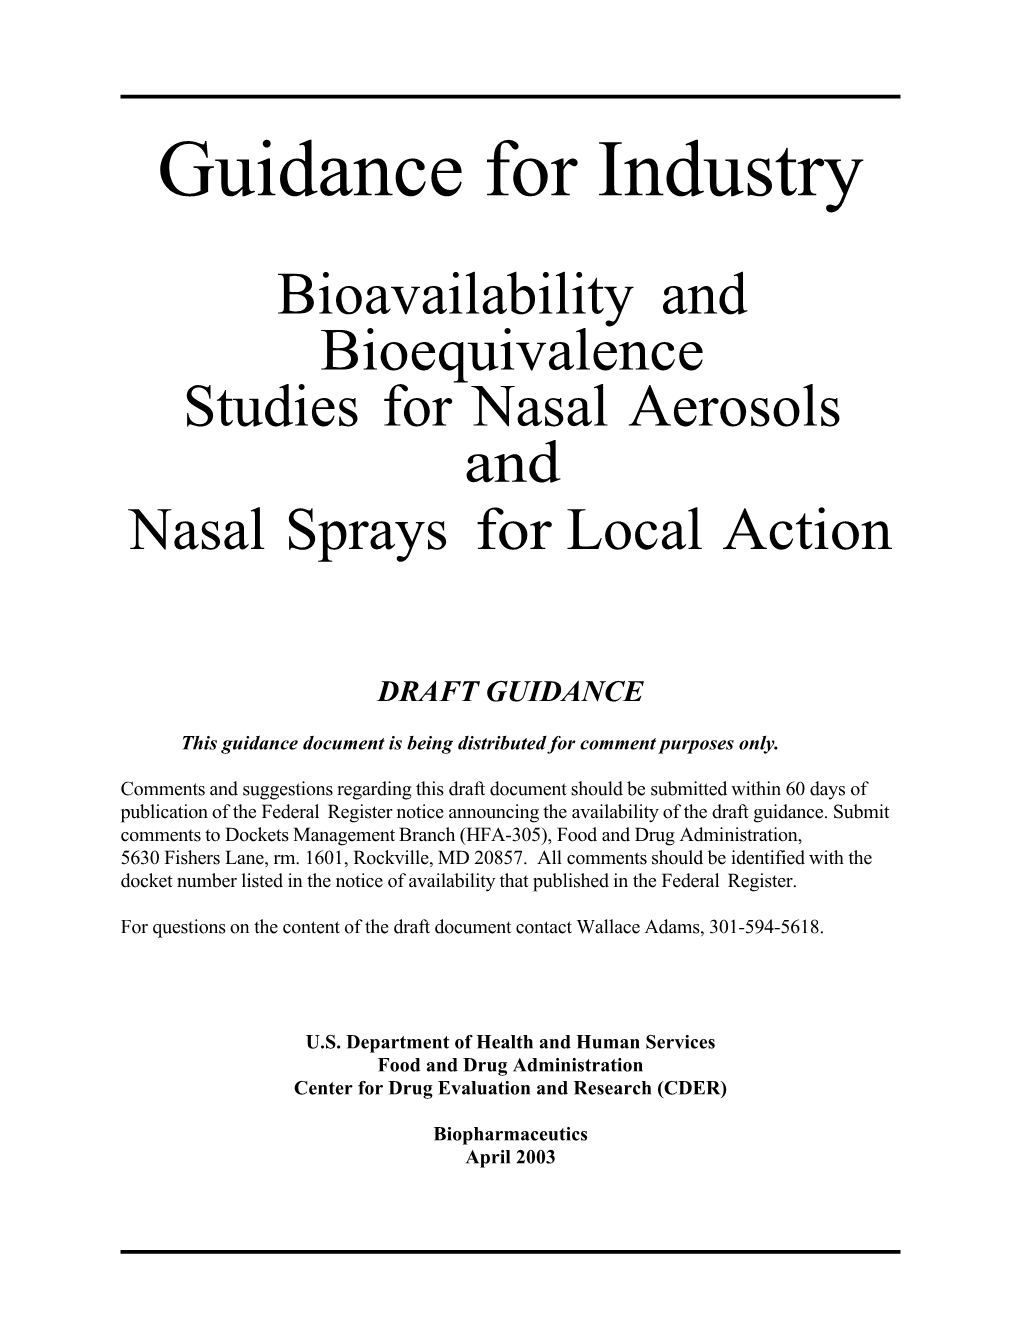 Bioavailability and Bioequivalence Studies for Nasal Aerosols And